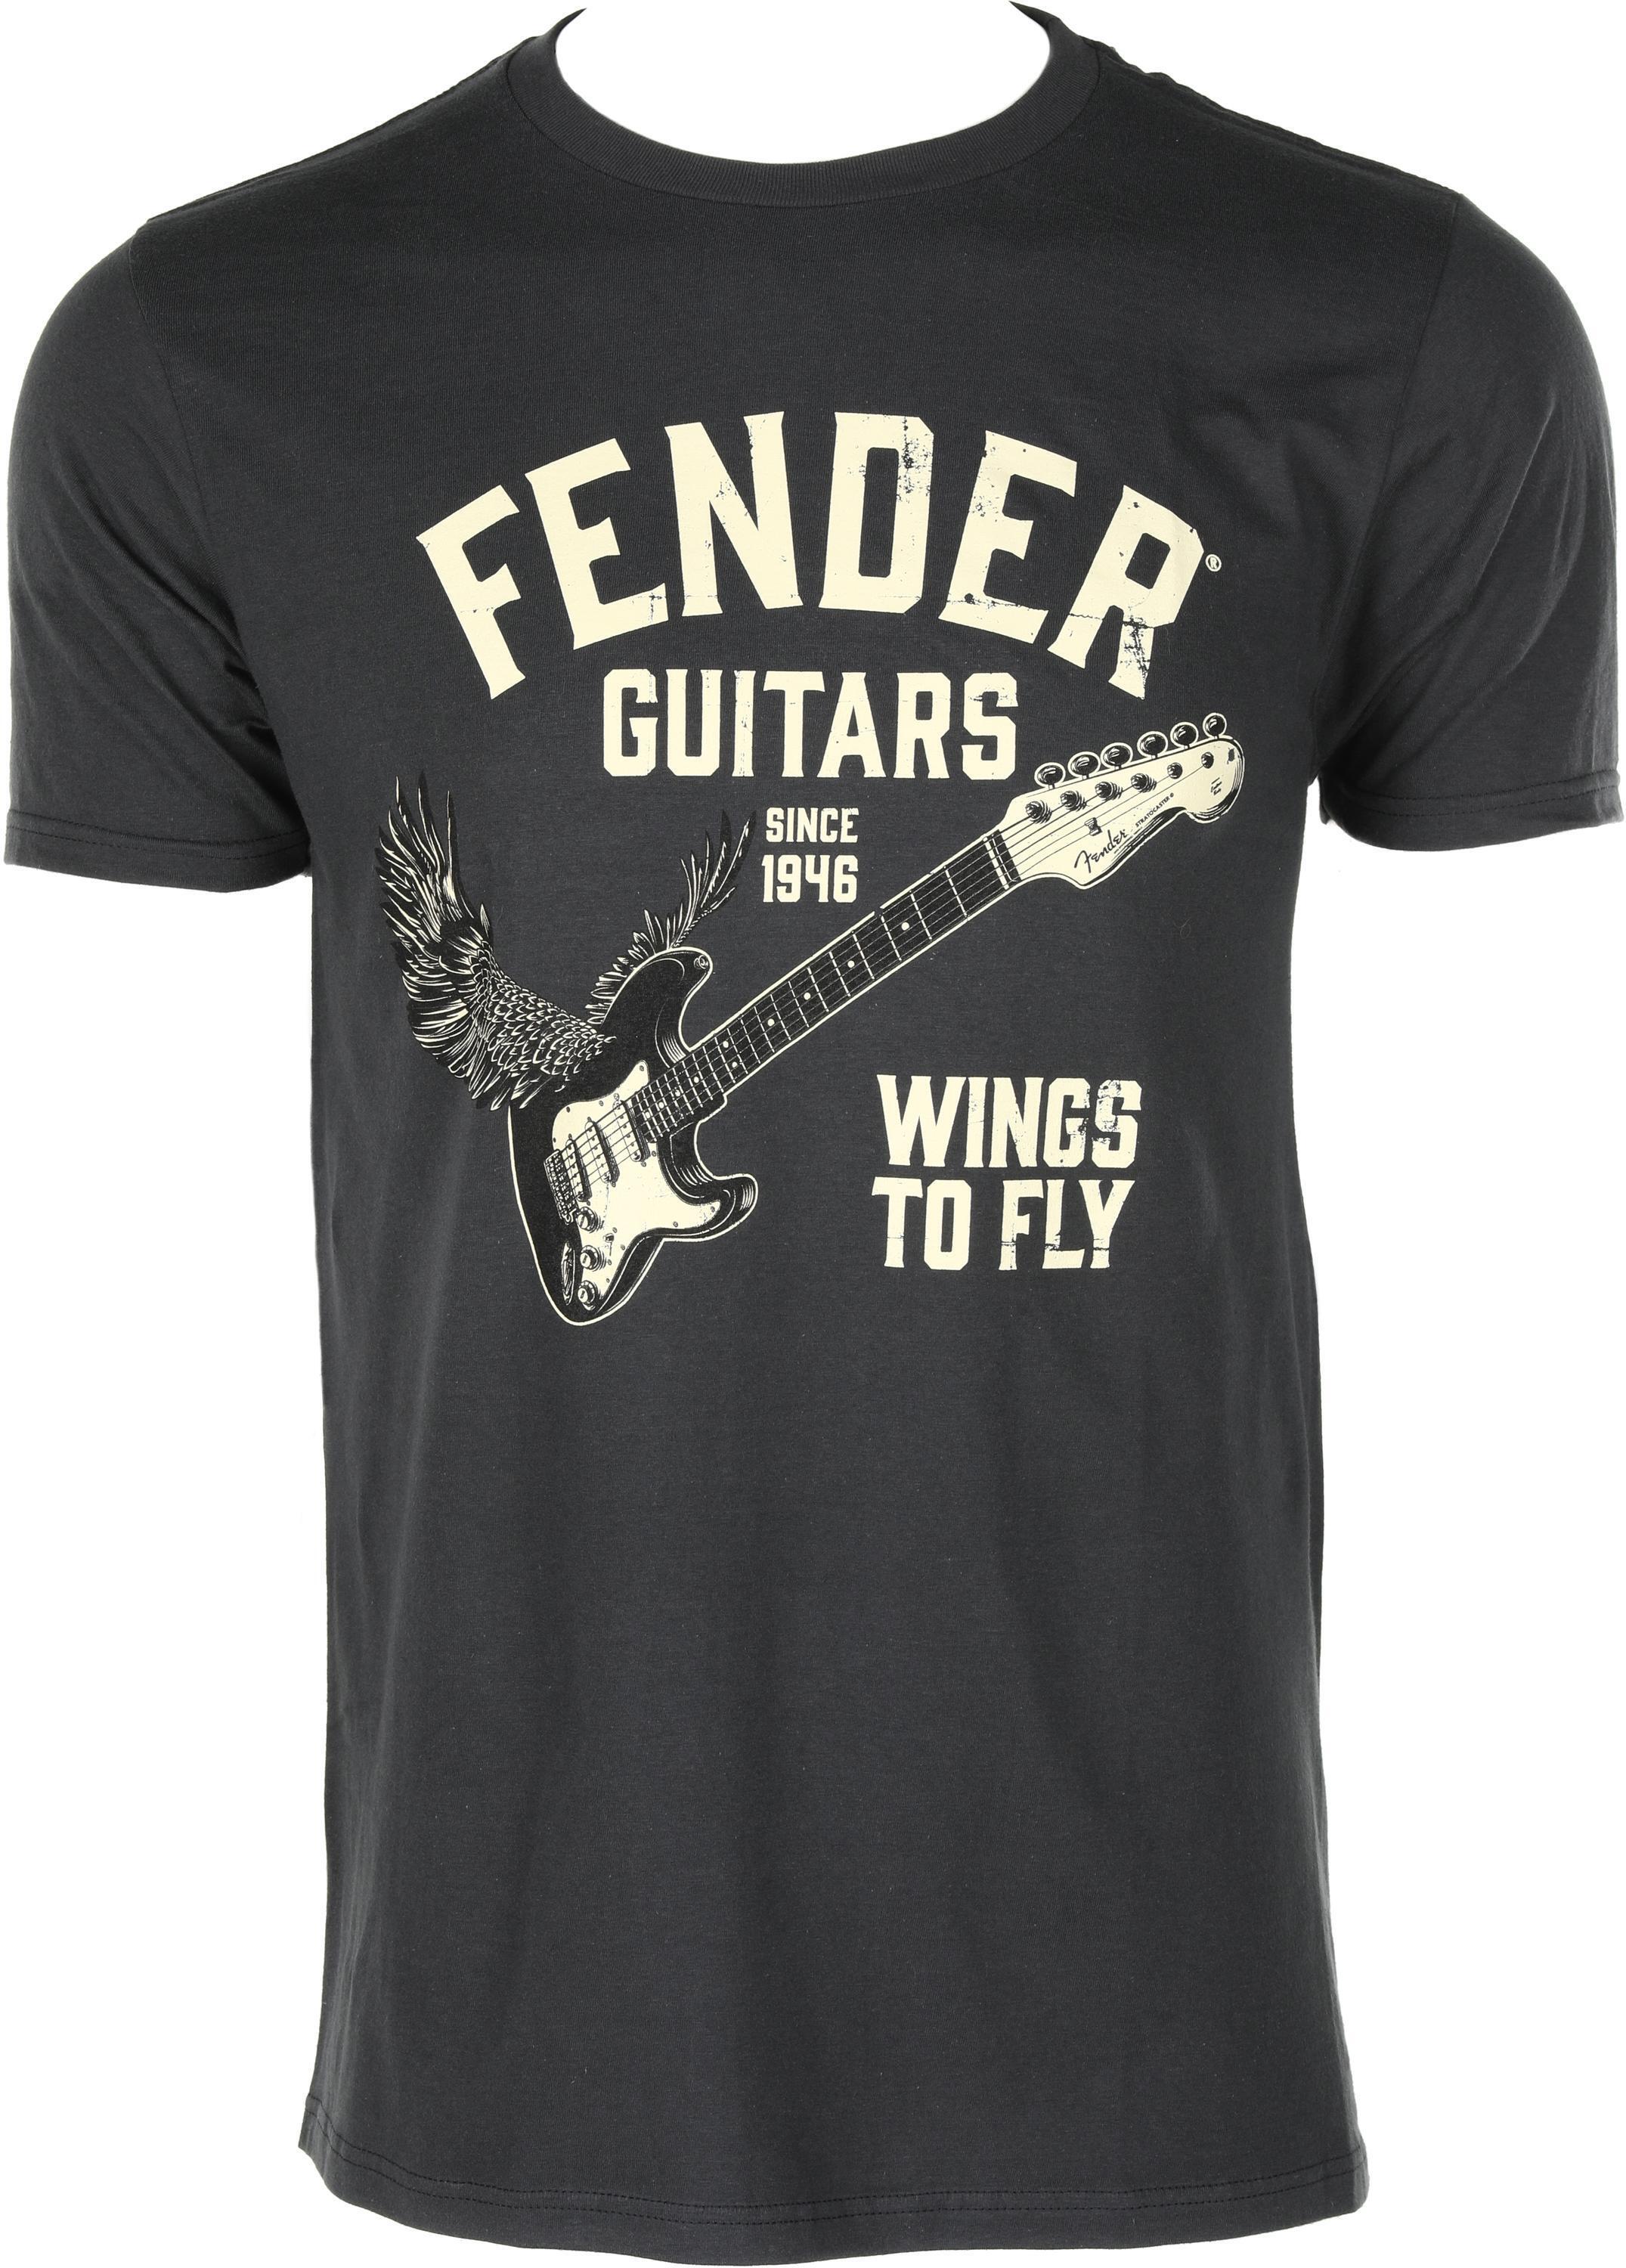 Fender Wings to Fly T-shirt - XX-Large